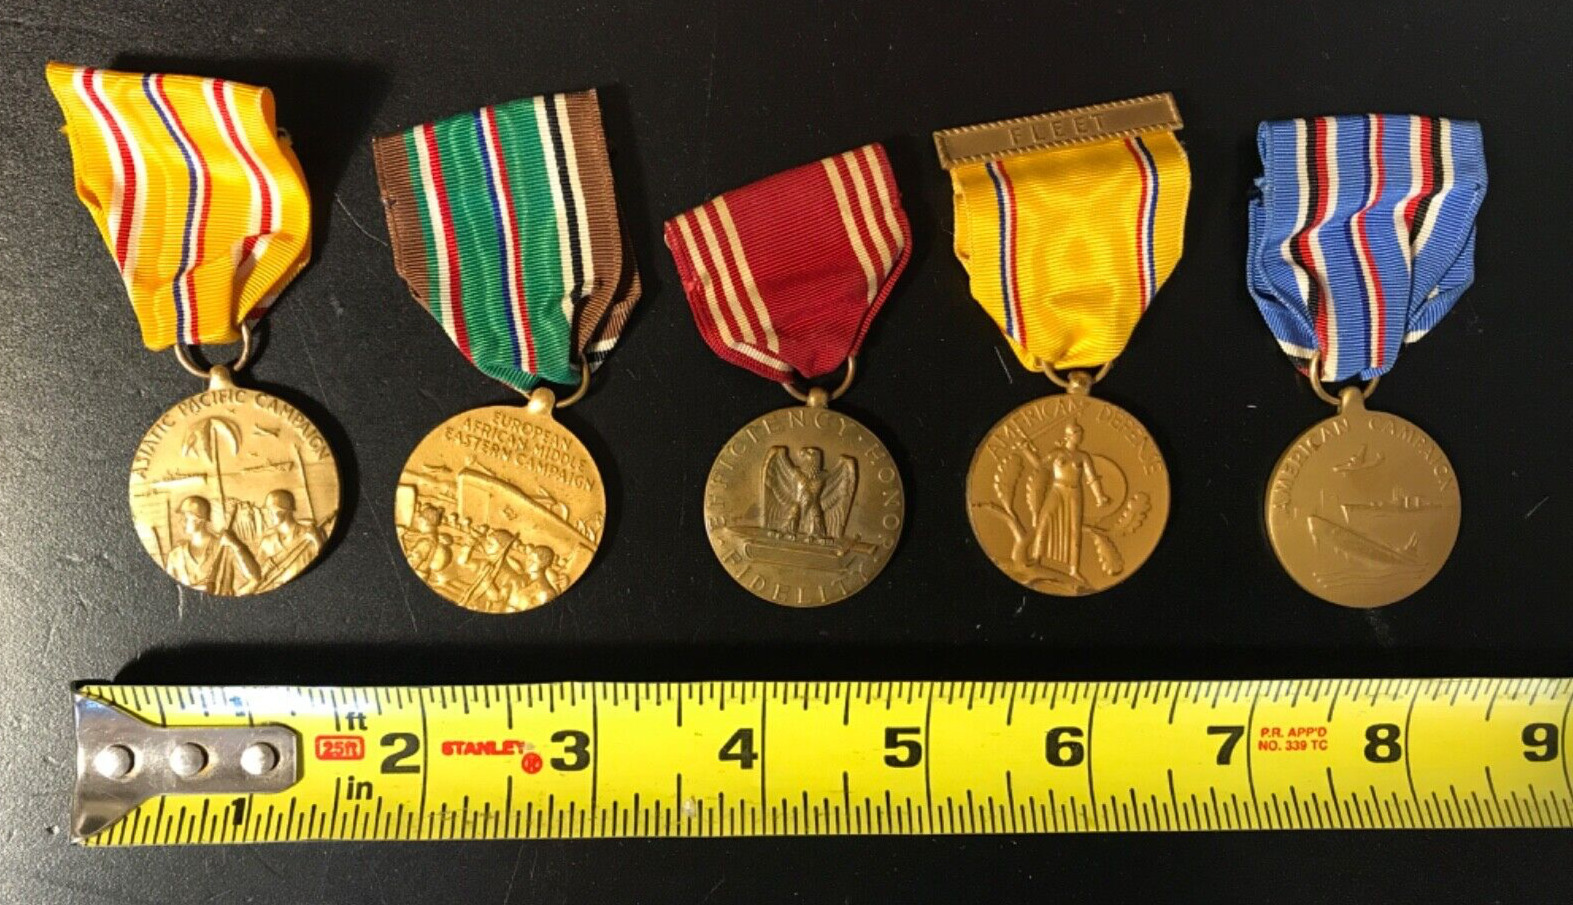 5 - WW2 Military 1941-45 Service Medals Euro African Campaign - Good Conduct